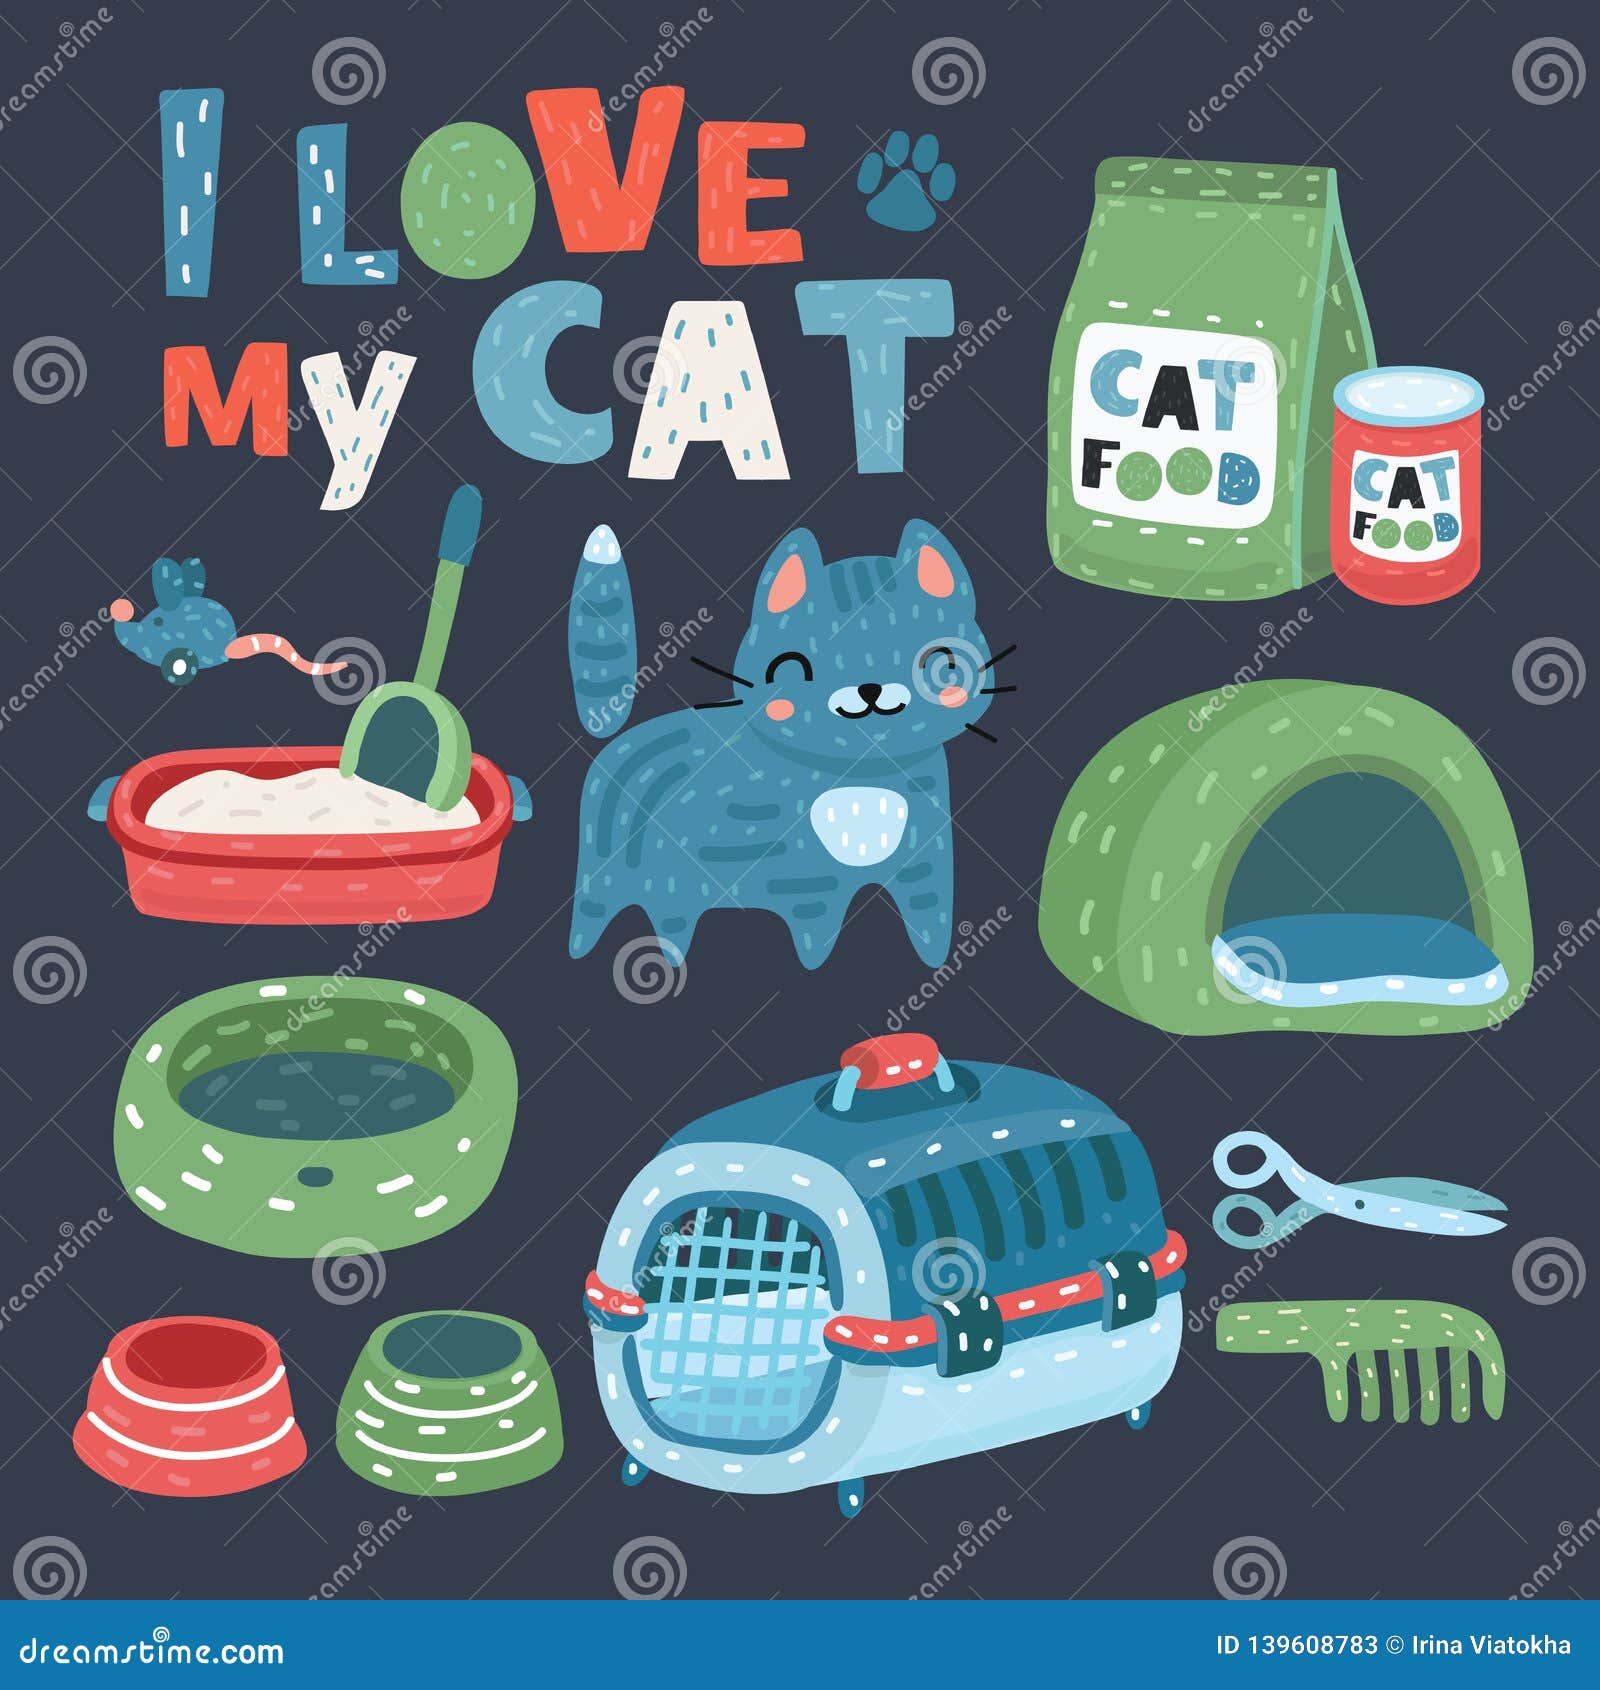 cat food, thing and toys.